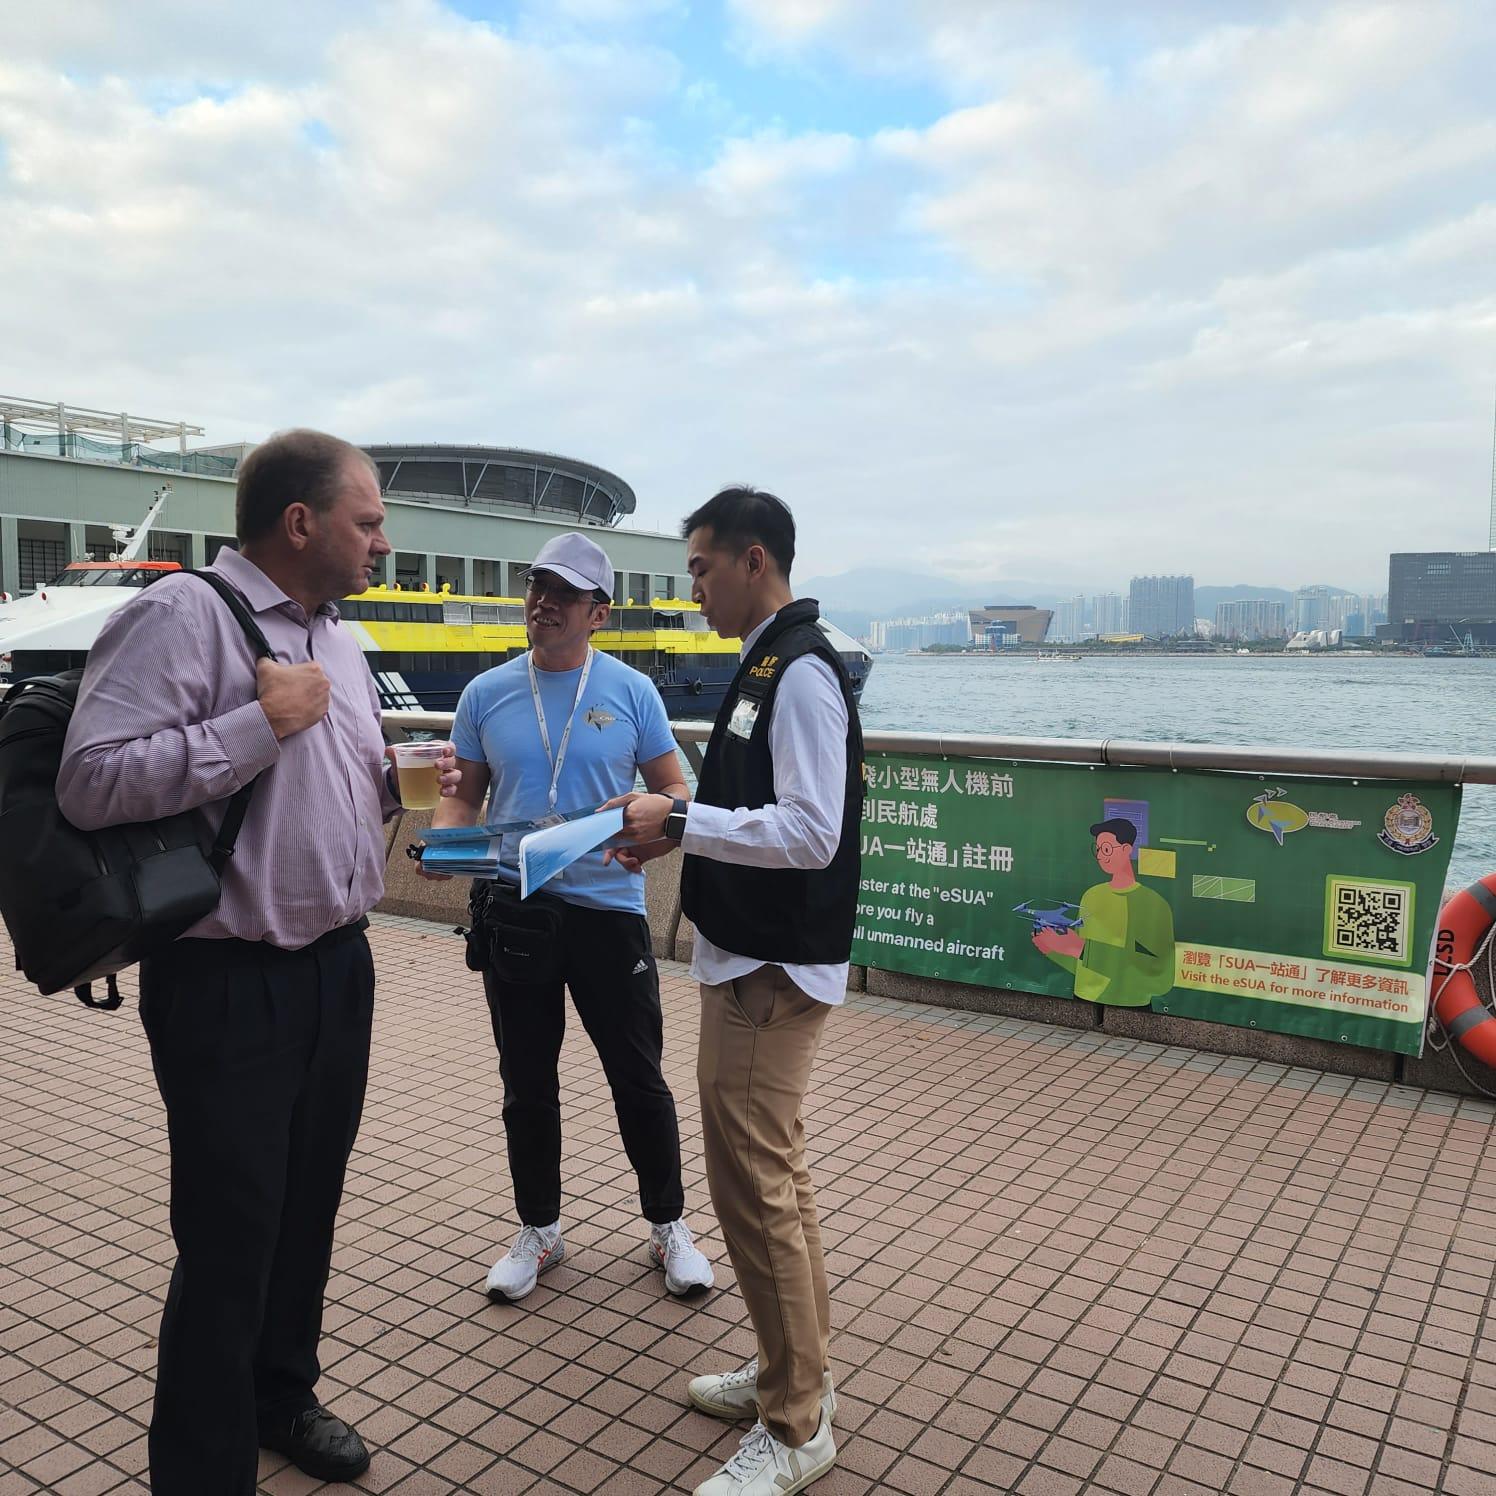 The Civil Aviation Department (CAD) conducted a joint publicity operation with the Police today (December 13) to enhance the safety awareness of the public and tourists of small unmanned aircraft operations. Photo shows a member of the public receiving publicity materials from CAD and Police officers along Victoria Harbour and being reminded about the establishment of a temporary restricted flying zone along Victoria Harbour this Saturday (December 16).